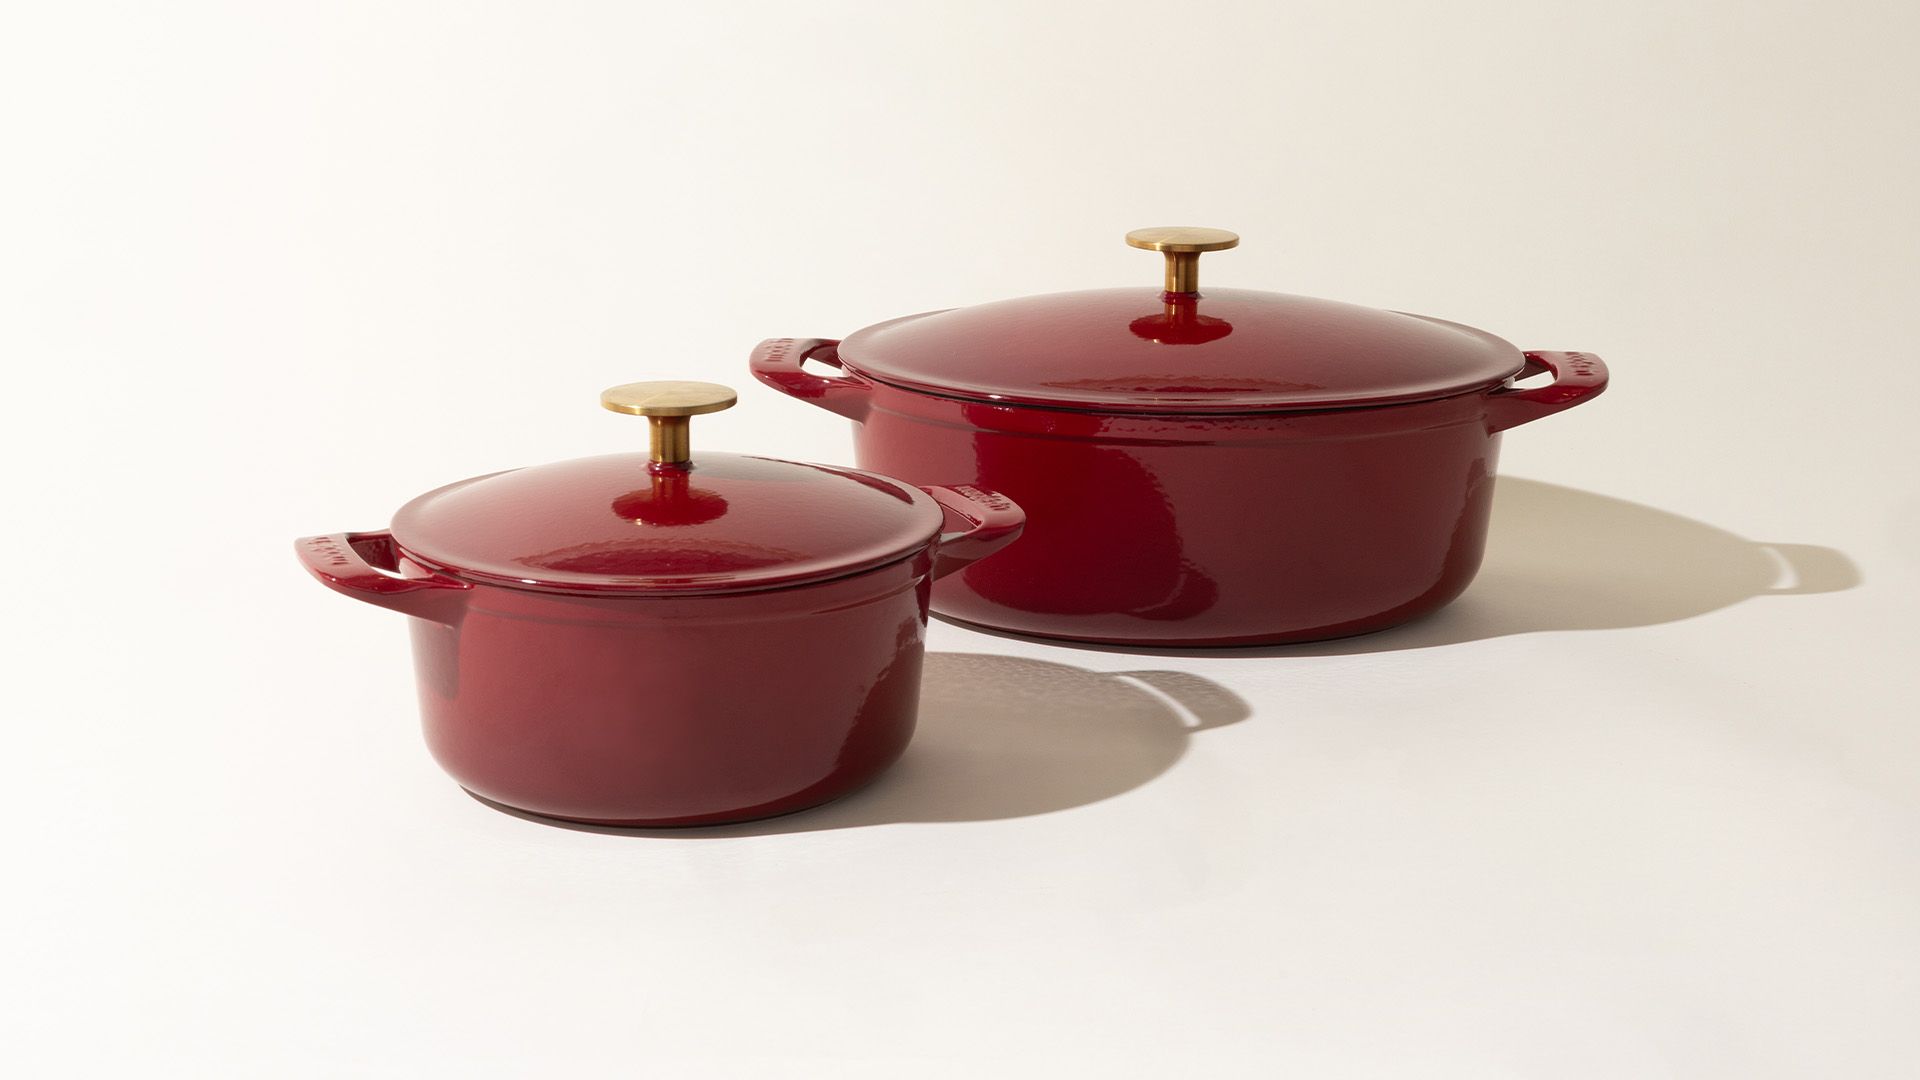 Crofton Cast Iron Red Cherry Enameled 5qt w/ Lid - and - Ernesto Cast Iron  (2010) Dutch Oven w/ Lid. Self Basting. 2 Items - Bunting Online Auctions